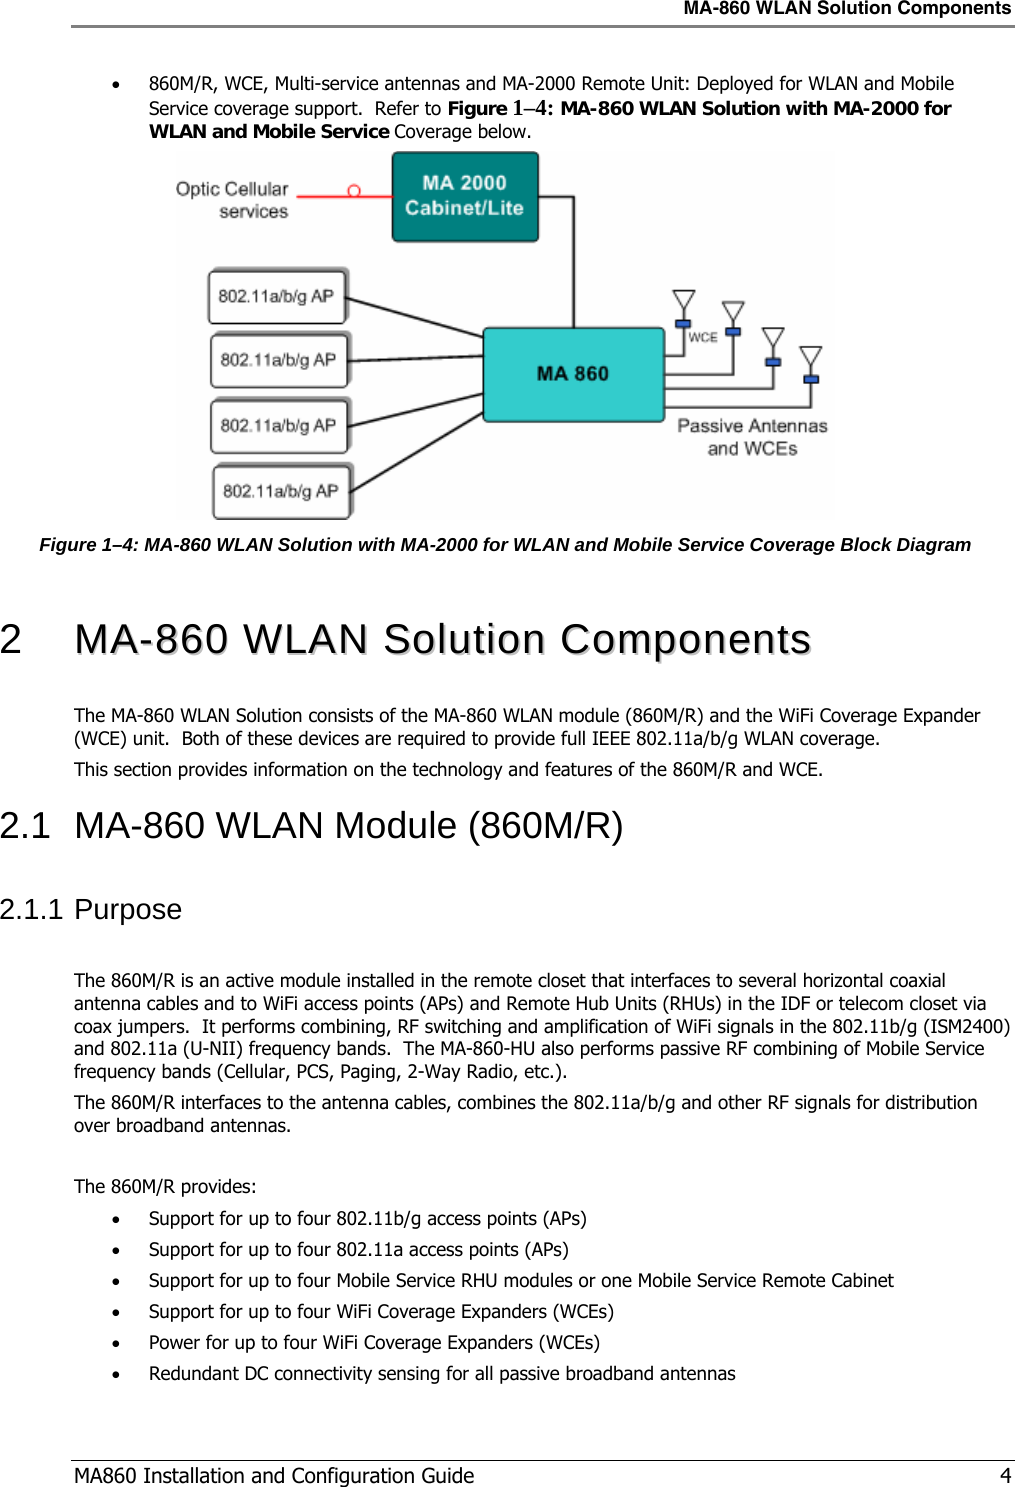 MA-860 WLAN Solution Components  MA860 Installation and Configuration Guide   4 • 860M/R, WCE, Multi-service antennas and MA-2000 Remote Unit: Deployed for WLAN and Mobile Service coverage support.  Refer to Figure  1–4: MA-860 WLAN Solution with MA-2000 for WLAN and Mobile Service Coverage below.  Figure  1–4: MA-860 WLAN Solution with MA-2000 for WLAN and Mobile Service Coverage Block Diagram  2   MMAA--886600  WWLLAANN  SSoolluuttiioonn  CCoommppoonneennttss  The MA-860 WLAN Solution consists of the MA-860 WLAN module (860M/R) and the WiFi Coverage Expander (WCE) unit.  Both of these devices are required to provide full IEEE 802.11a/b/g WLAN coverage. This section provides information on the technology and features of the 860M/R and WCE. 2.1  MA-860 WLAN Module (860M/R) 2.1.1 Purpose  The 860M/R is an active module installed in the remote closet that interfaces to several horizontal coaxial antenna cables and to WiFi access points (APs) and Remote Hub Units (RHUs) in the IDF or telecom closet via coax jumpers.  It performs combining, RF switching and amplification of WiFi signals in the 802.11b/g (ISM2400) and 802.11a (U-NII) frequency bands.  The MA-860-HU also performs passive RF combining of Mobile Service frequency bands (Cellular, PCS, Paging, 2-Way Radio, etc.). The 860M/R interfaces to the antenna cables, combines the 802.11a/b/g and other RF signals for distribution over broadband antennas.  The 860M/R provides: • Support for up to four 802.11b/g access points (APs) • Support for up to four 802.11a access points (APs)  • Support for up to four Mobile Service RHU modules or one Mobile Service Remote Cabinet • Support for up to four WiFi Coverage Expanders (WCEs) • Power for up to four WiFi Coverage Expanders (WCEs) • Redundant DC connectivity sensing for all passive broadband antennas 